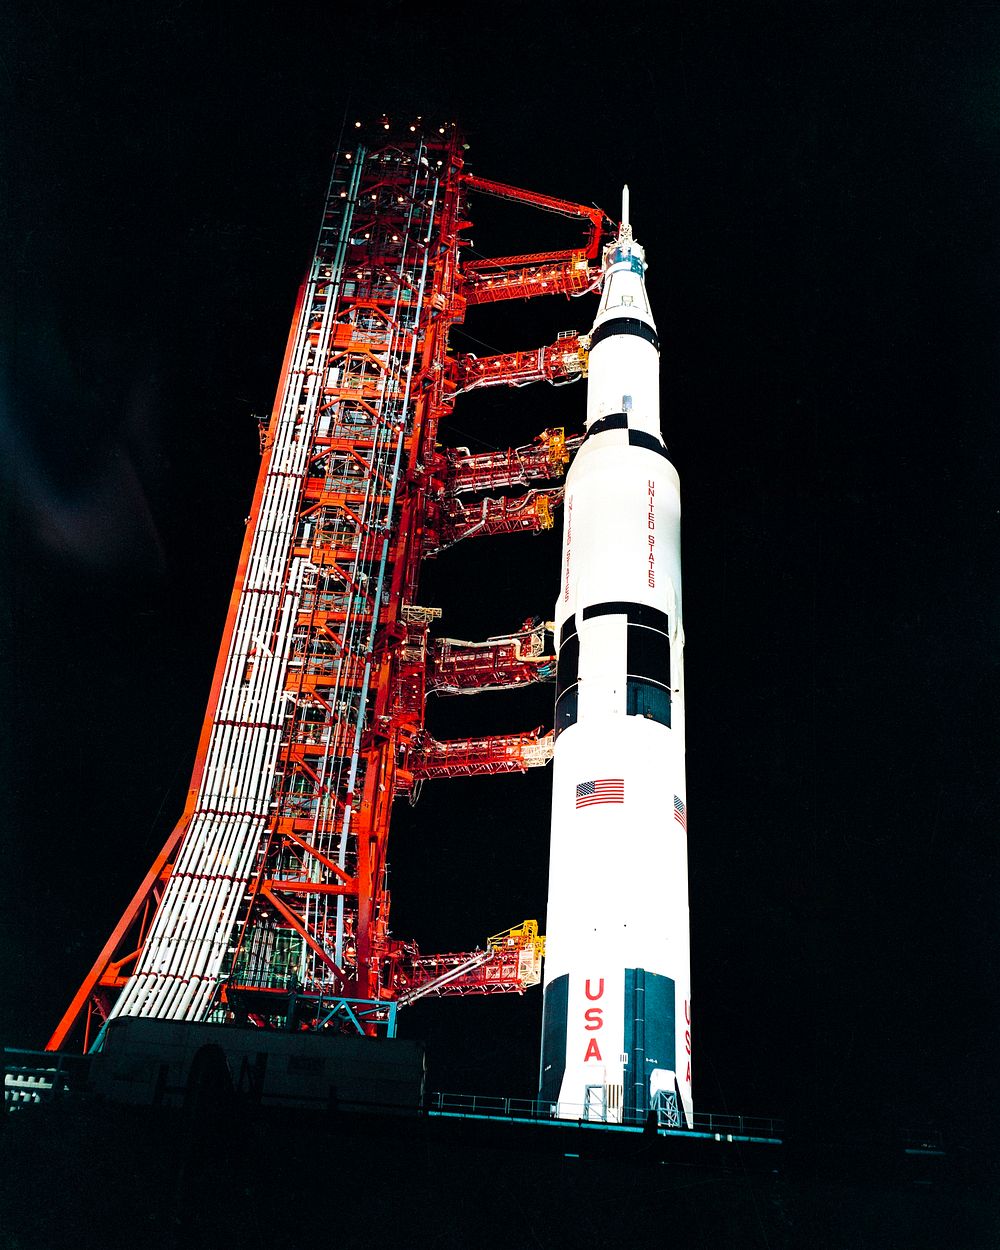 Nighttime, ground level view of Pad A, Launch Complex 39, Kennedy Space Center, showing the Apollo 13. Original from NASA.…